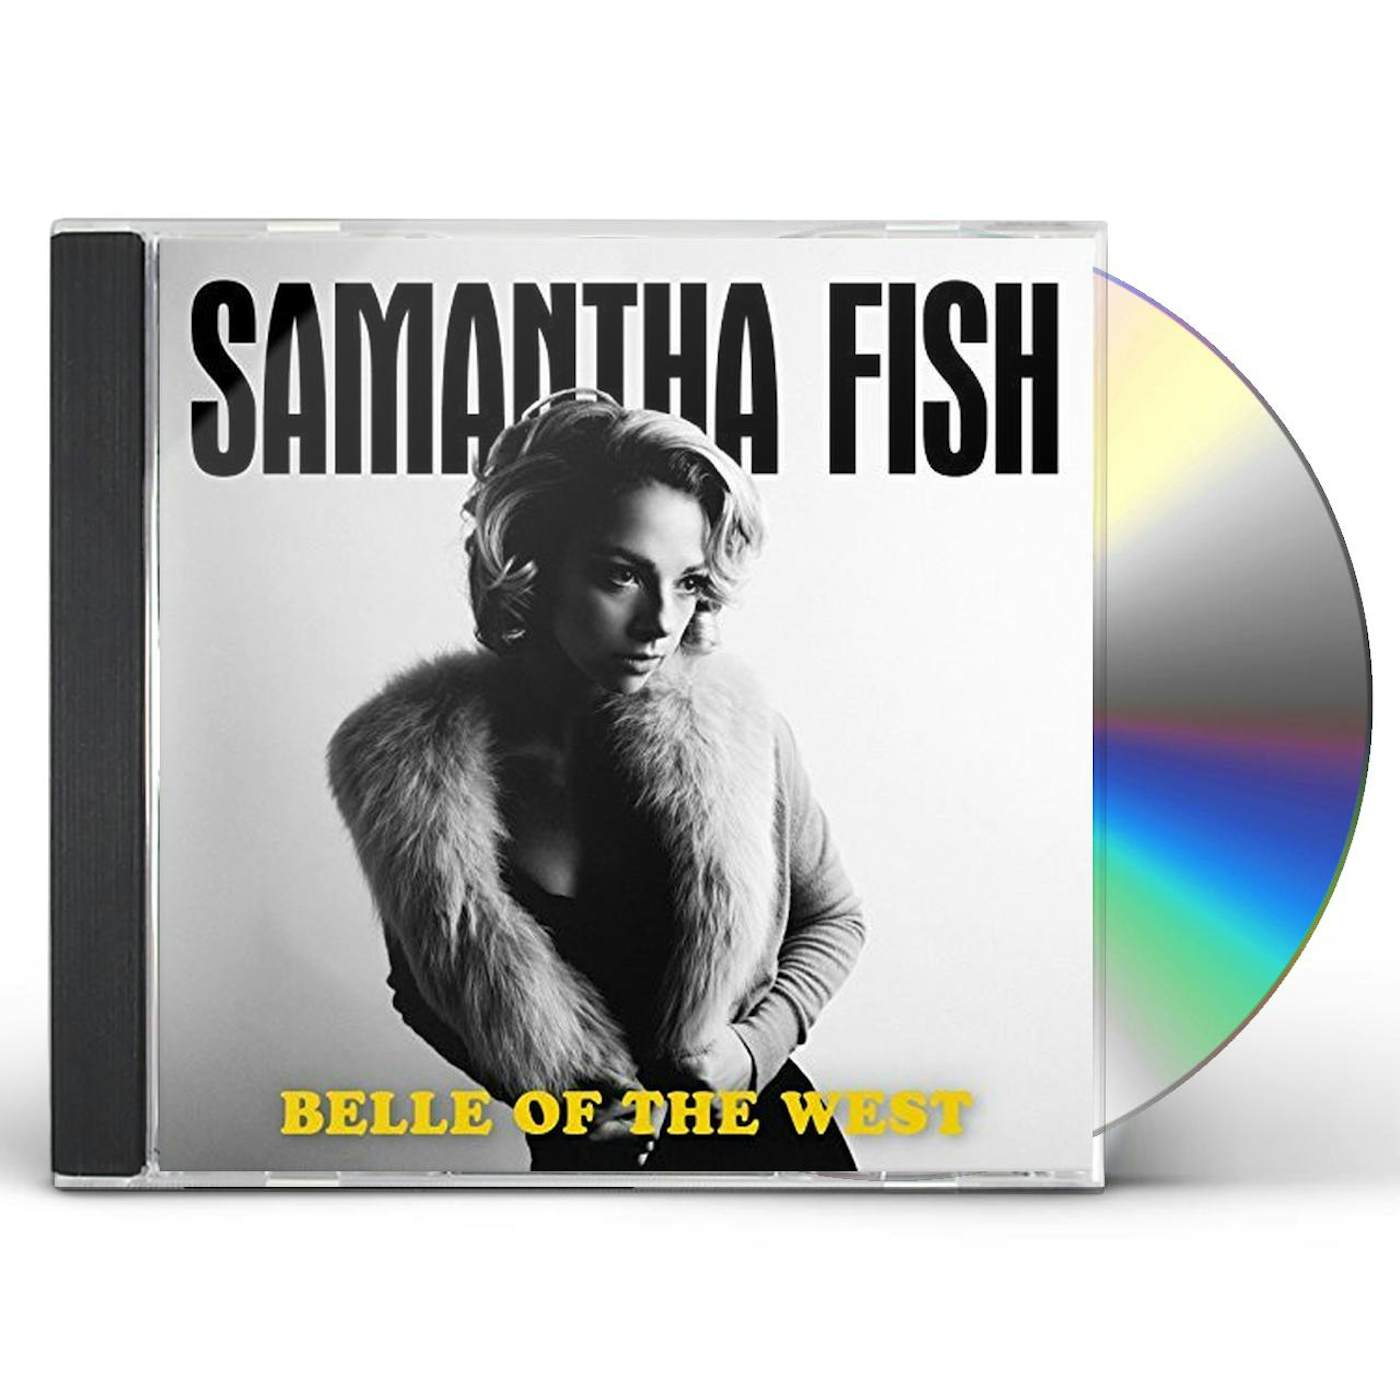 Samantha Fish BELLE OF THE WEST CD